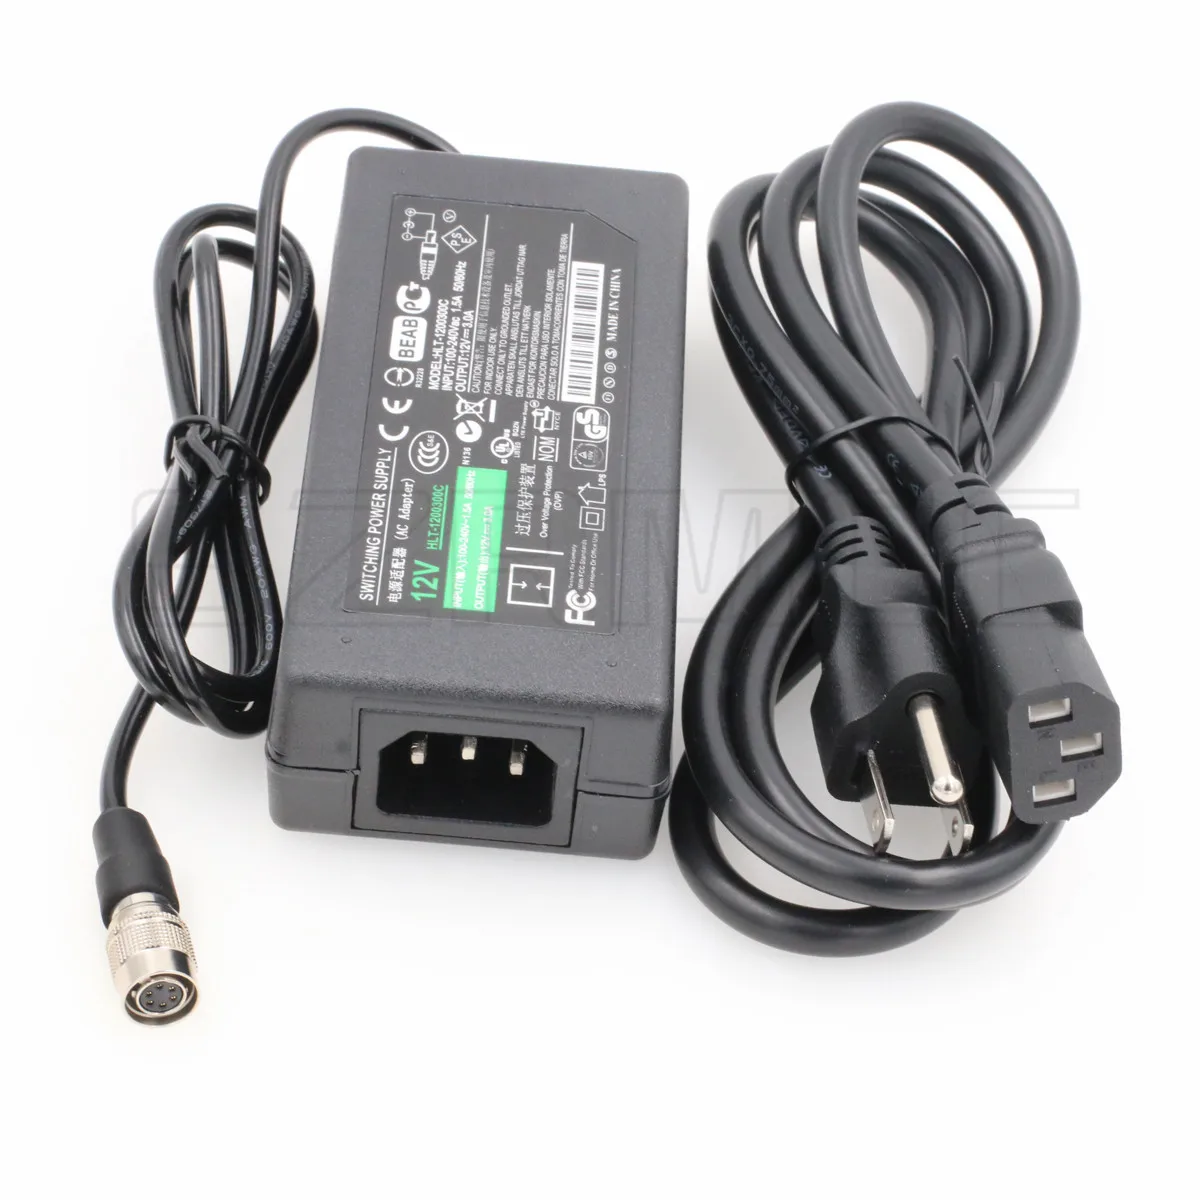 

12V 3A AC DC Power Supply Adapter for Basler Ace Racer Sprint GigE Industrial Camera Hirose 6 Pin Female